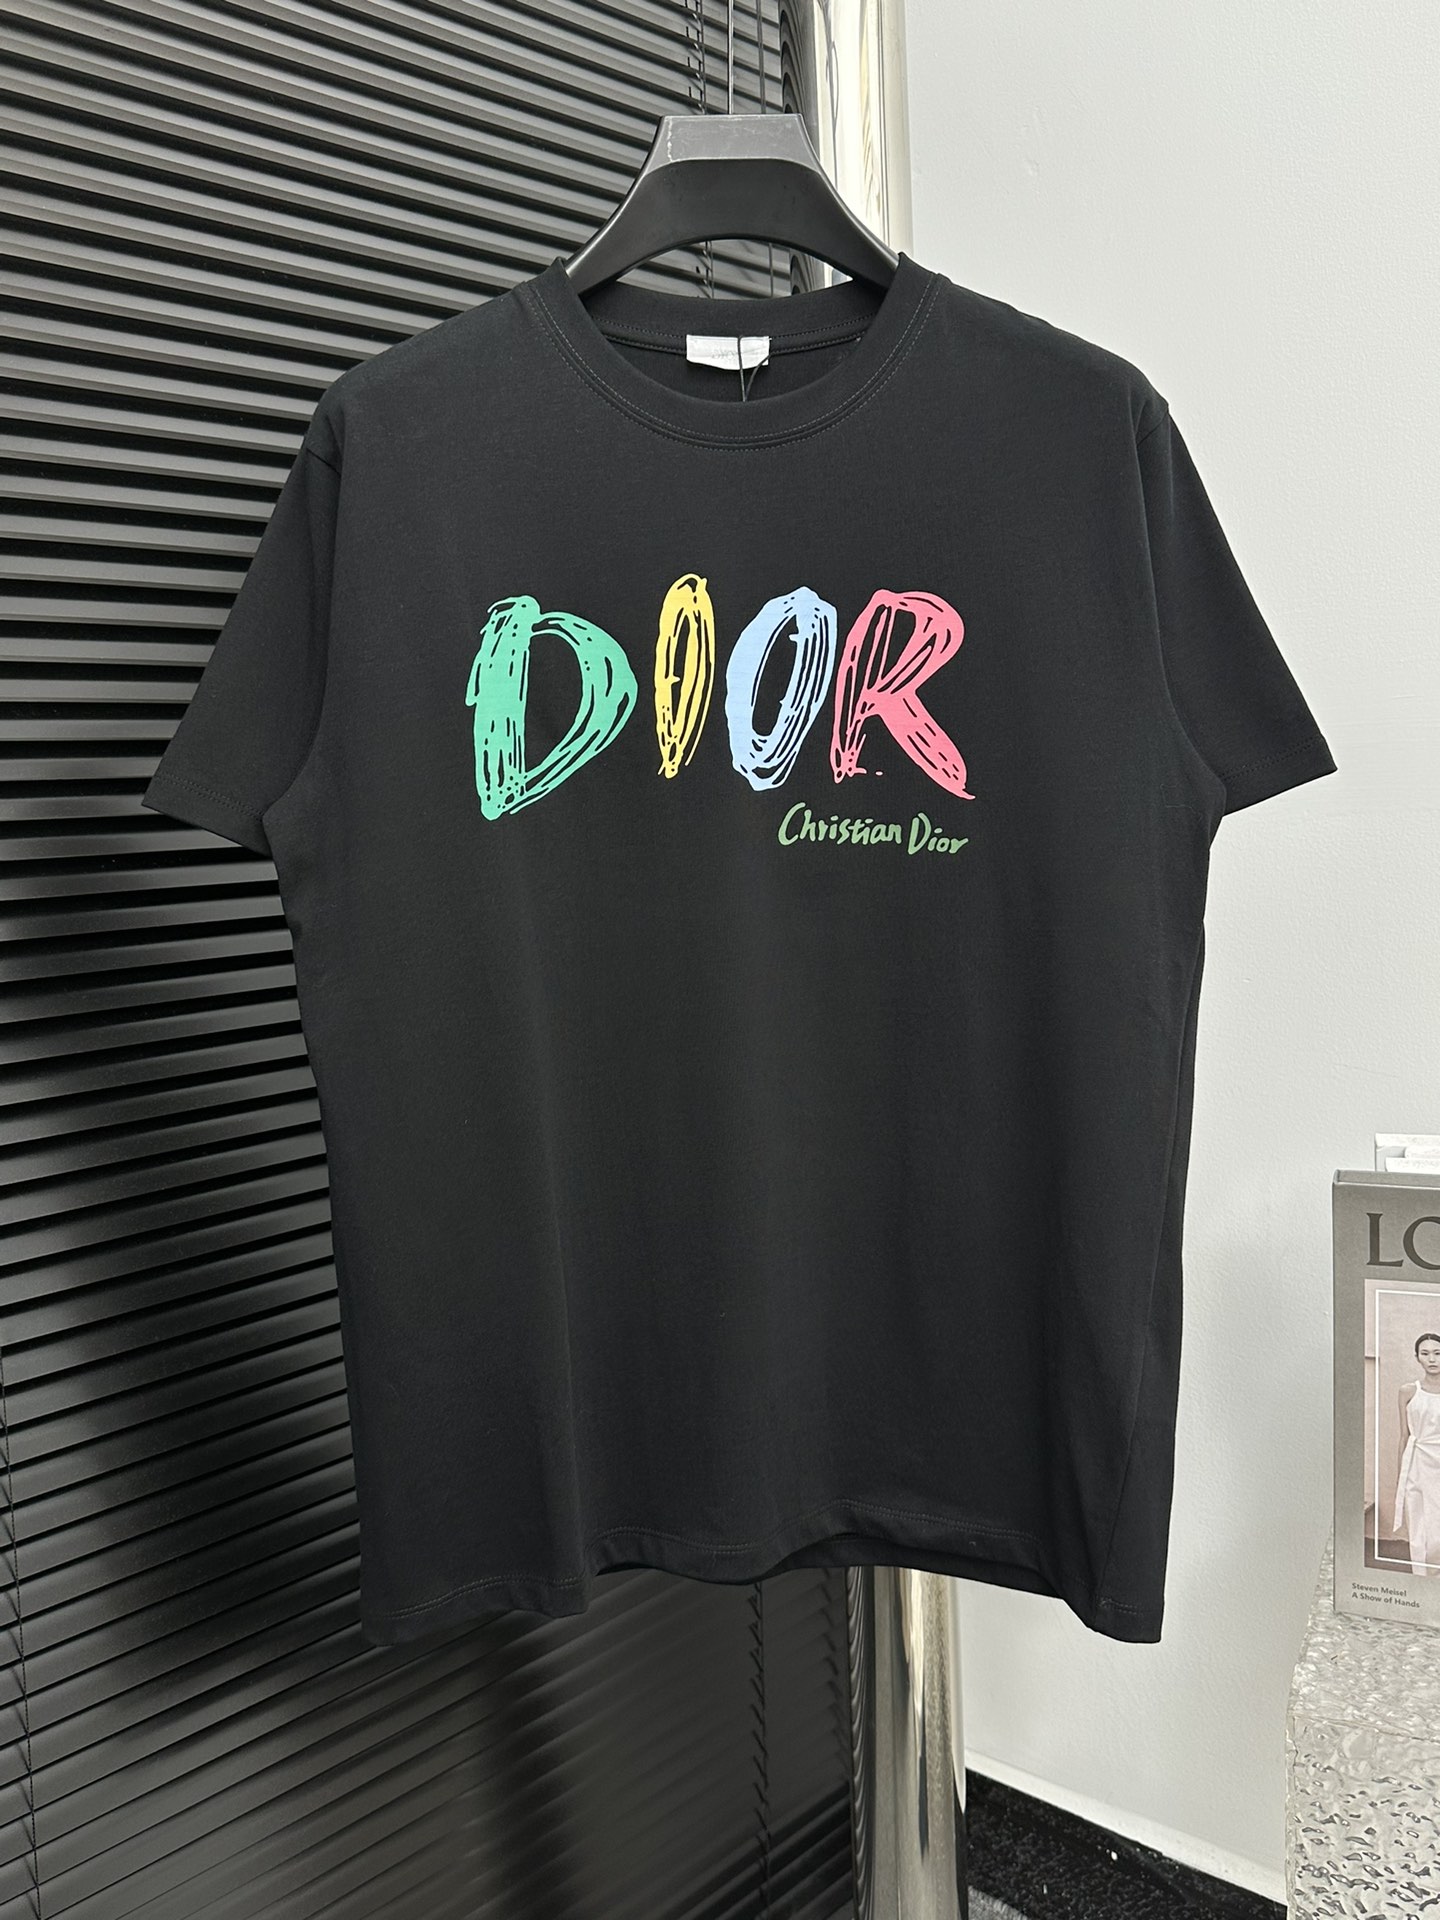 Dior Clothing T-Shirt Black Doodle White Printing Unisex Spring/Summer Collection Fashion Short Sleeve